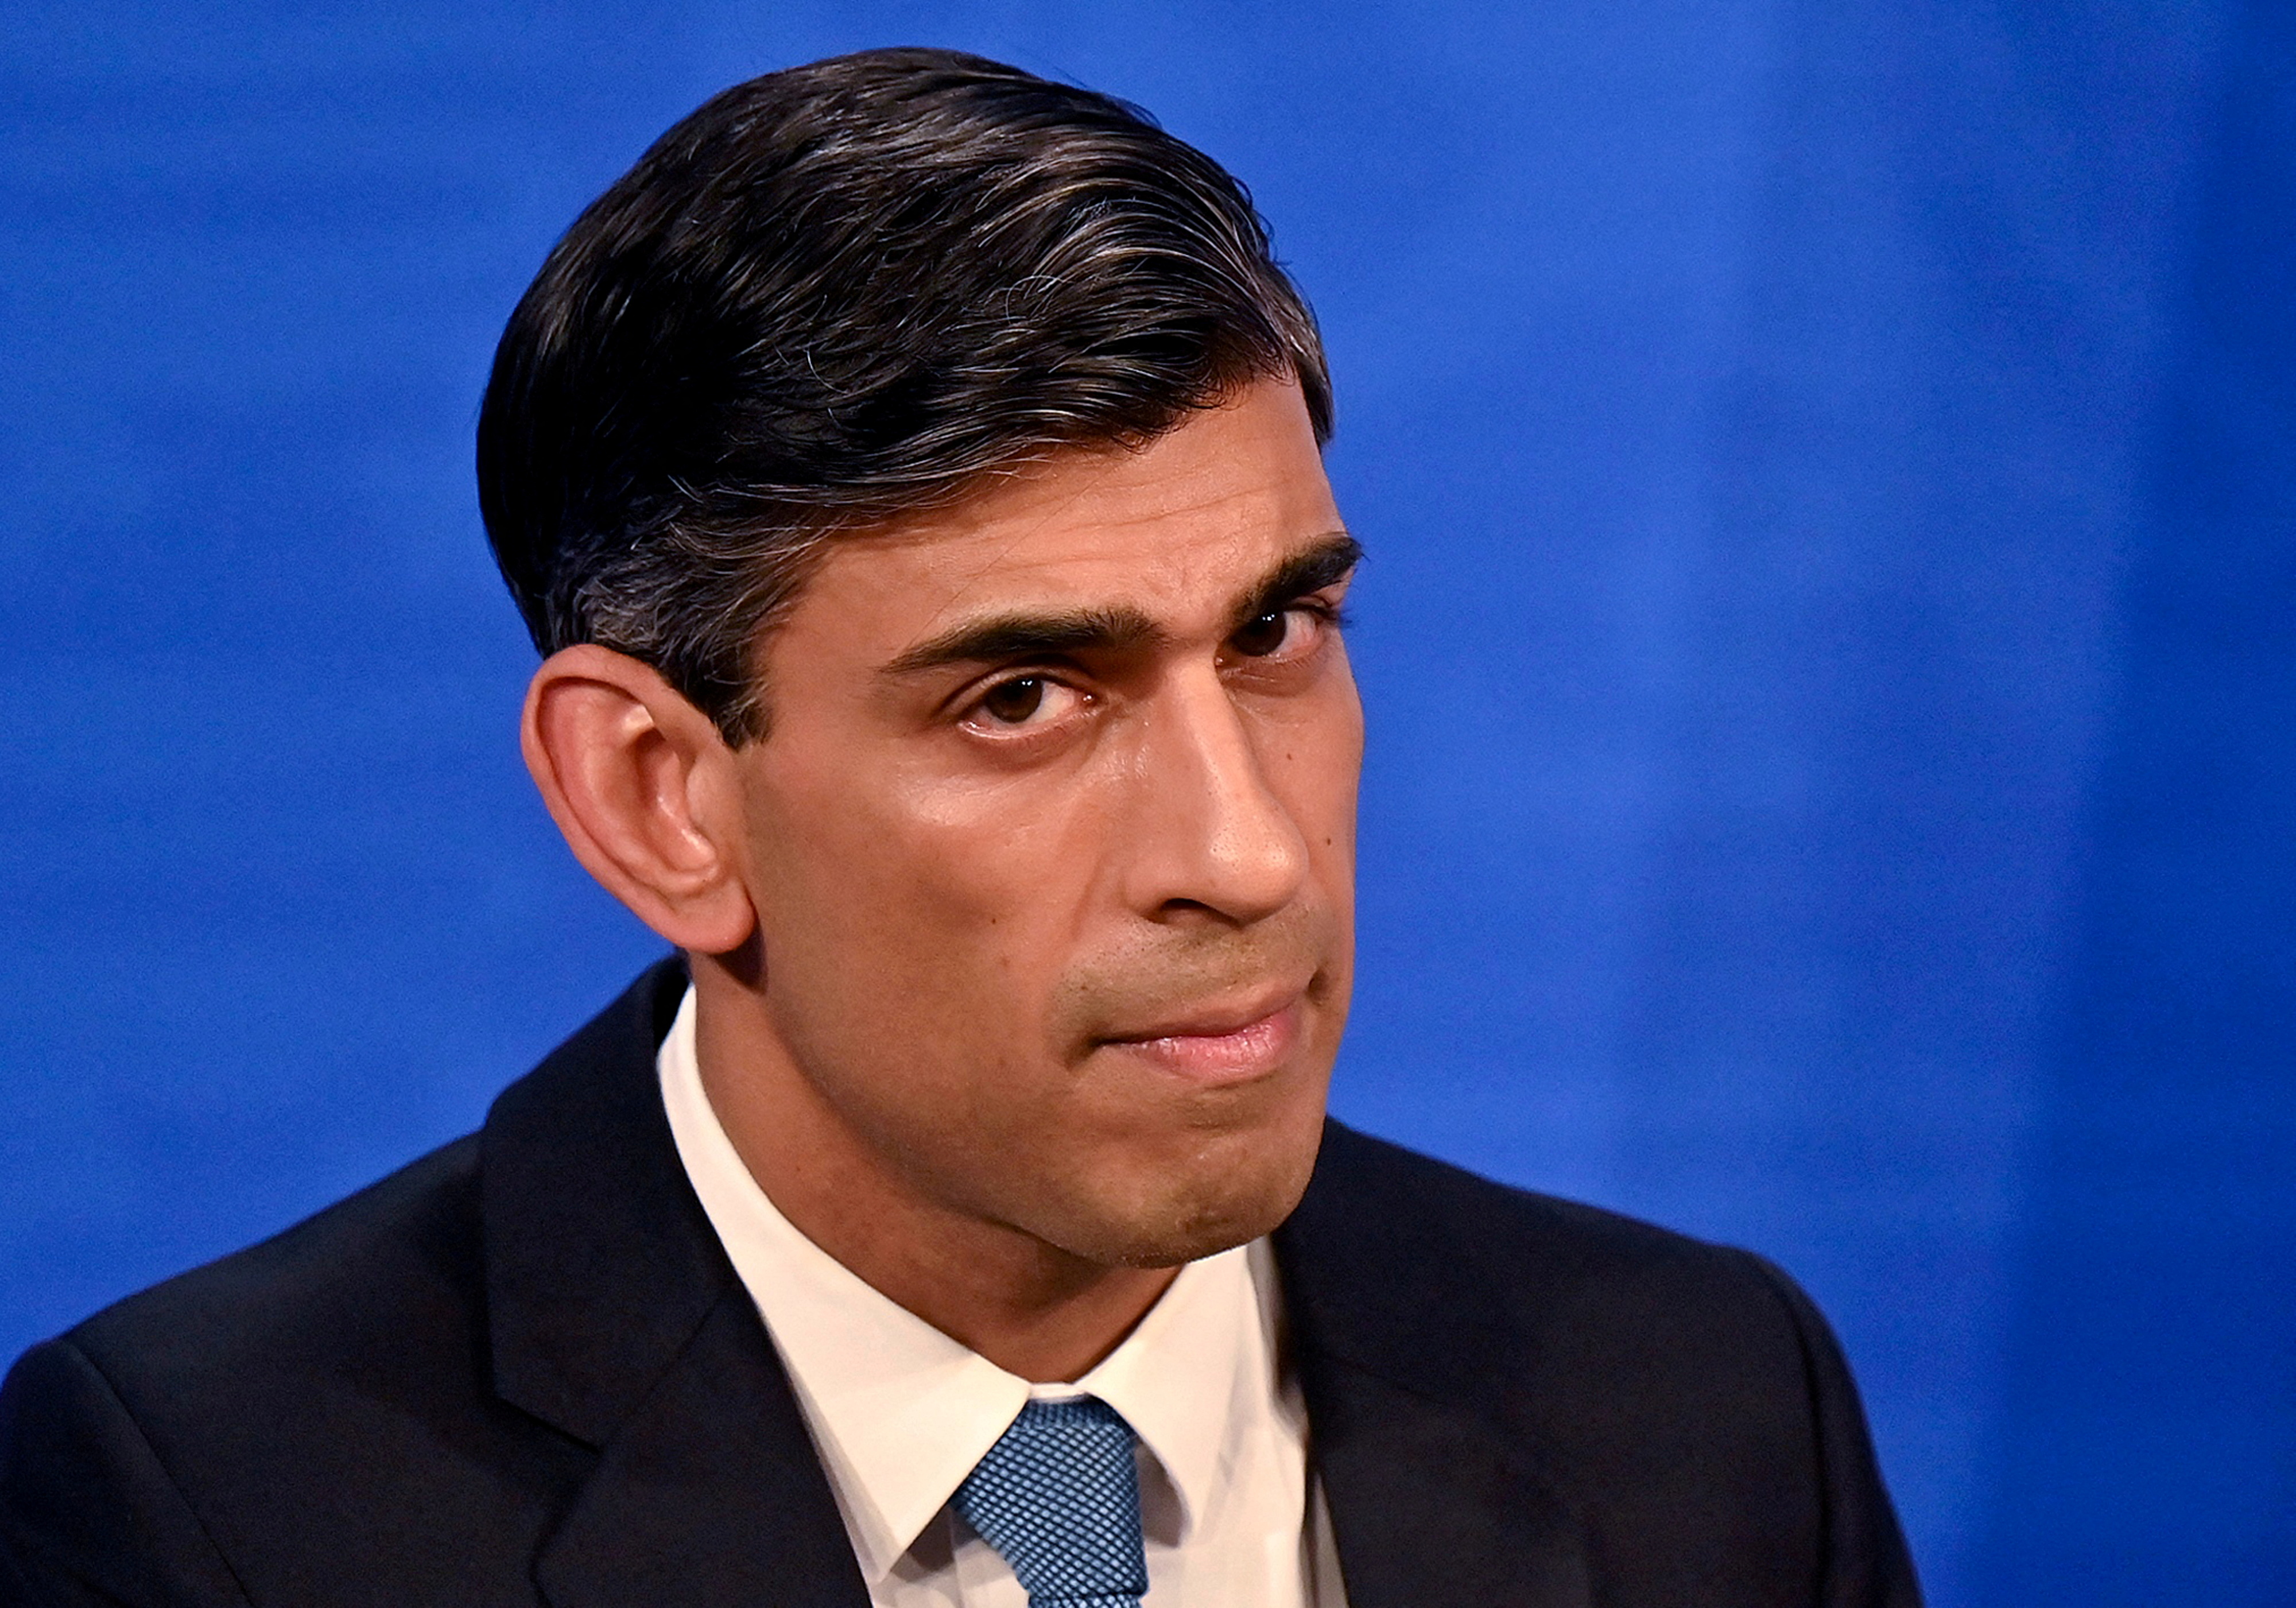 Britain's Chancellor of the Exchequer Rishi Sunak hosts a news conference in the Downing Street Briefing Room in London